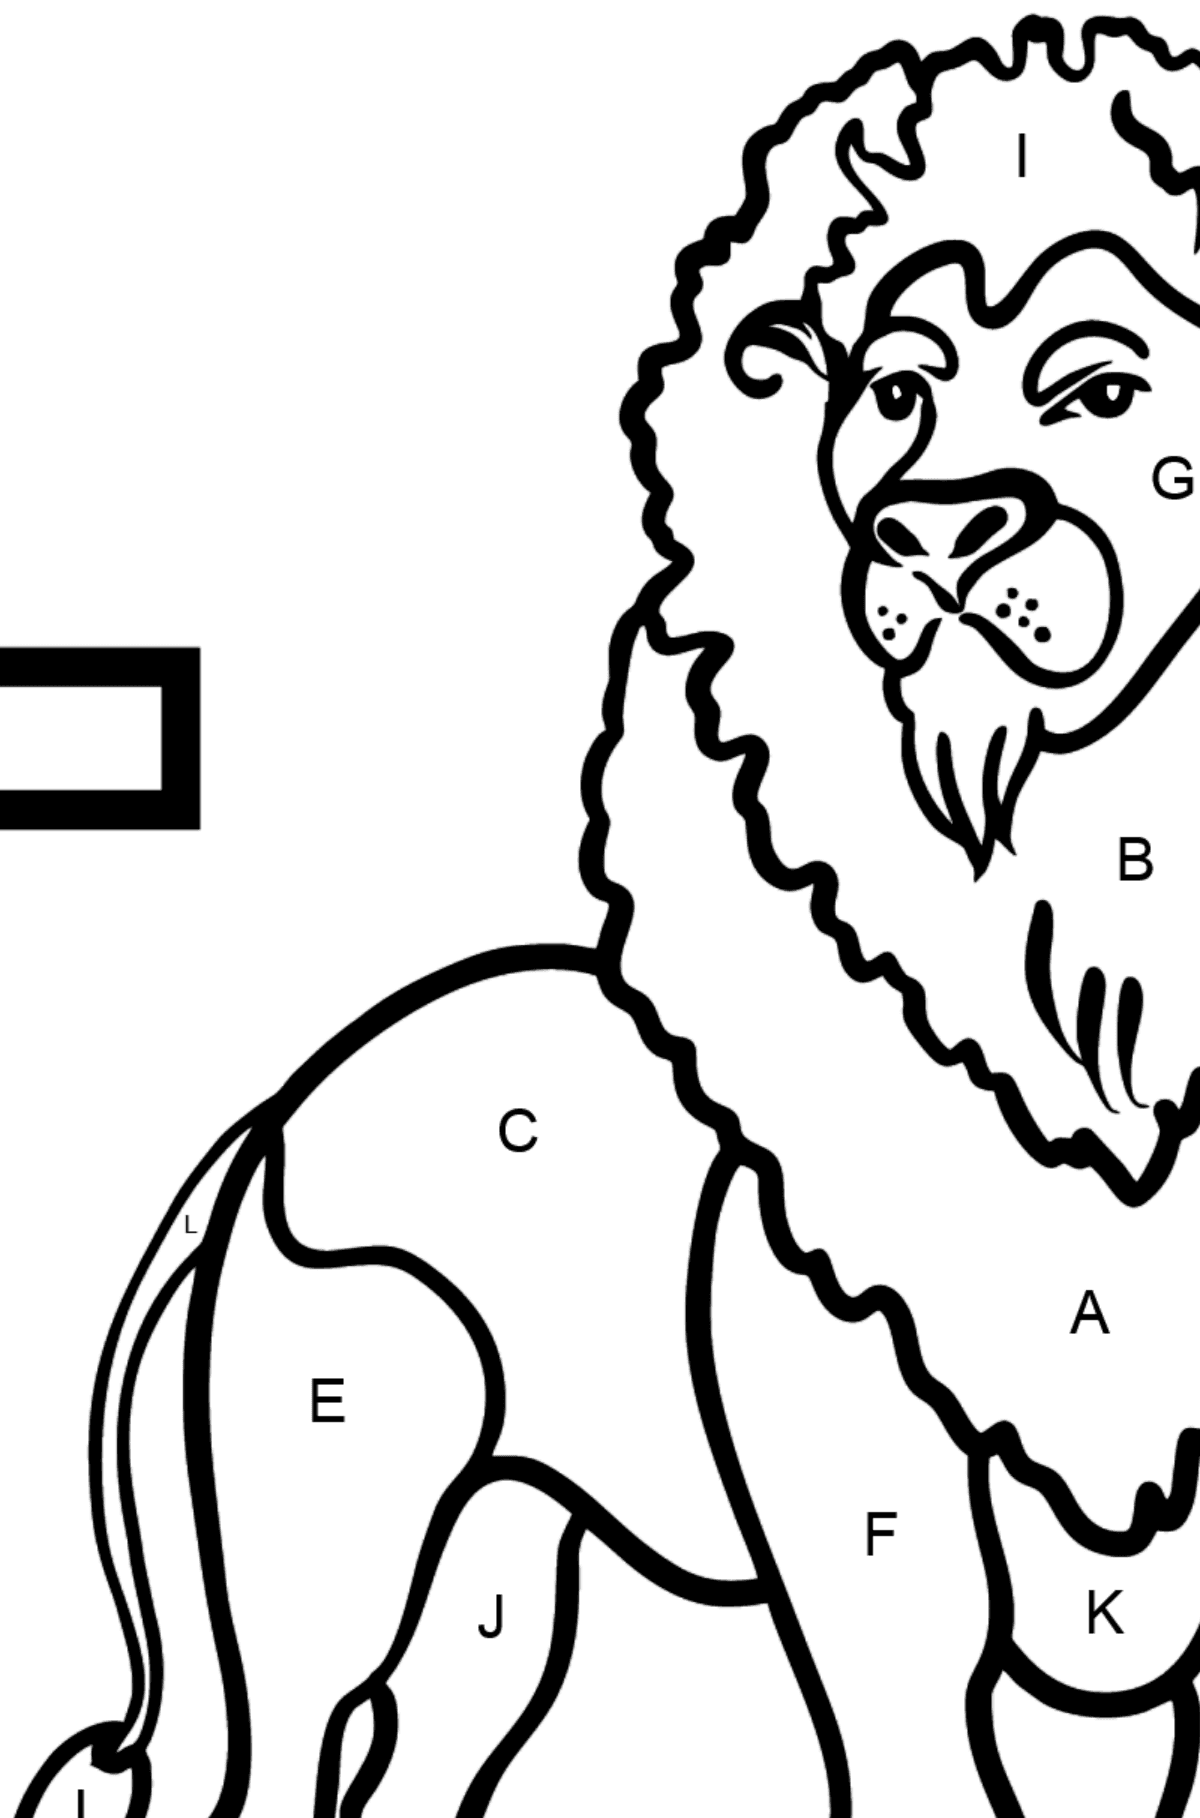 Spanish Letter L coloring pages - LEON - Coloring by Letters for Kids